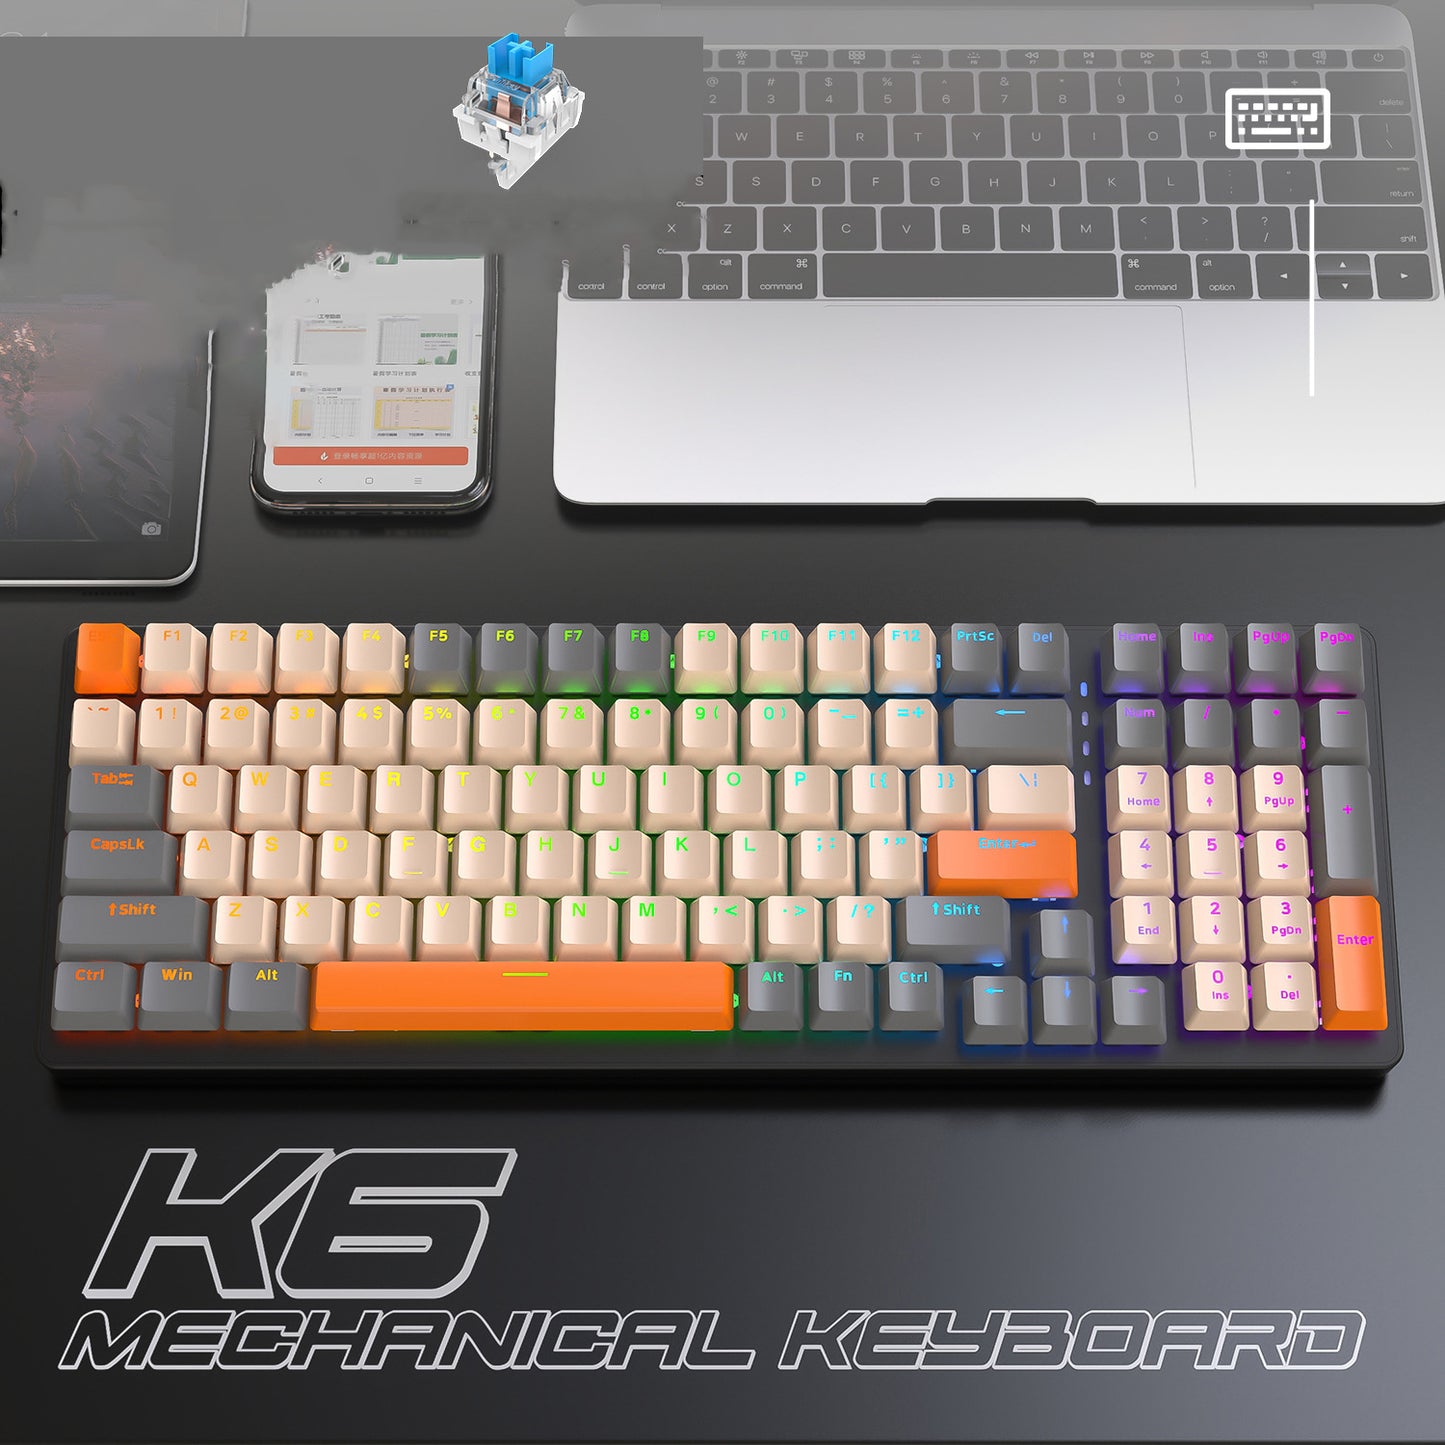 TriSync MechKey K6" - 3-Mode Mechanical Keyboard for Gaming and Productivity